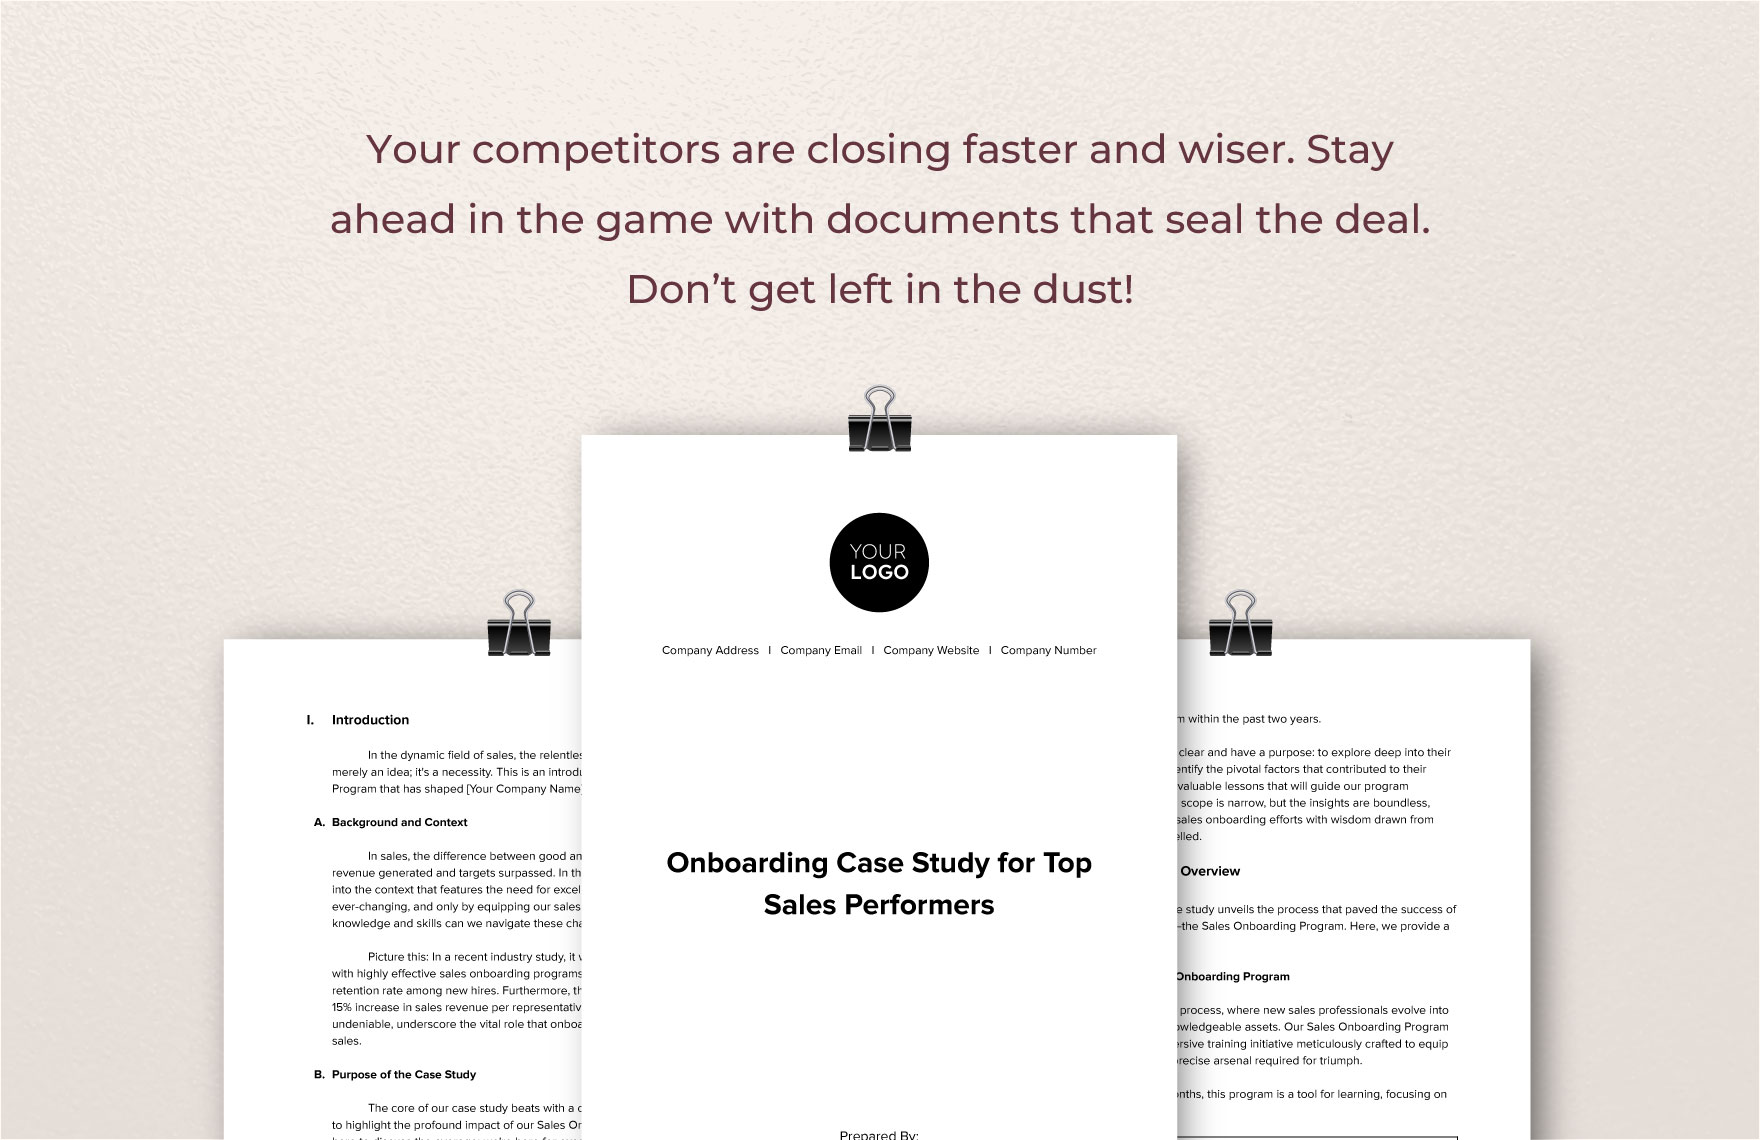 Onboarding Case Study for Top Sales Performers Template